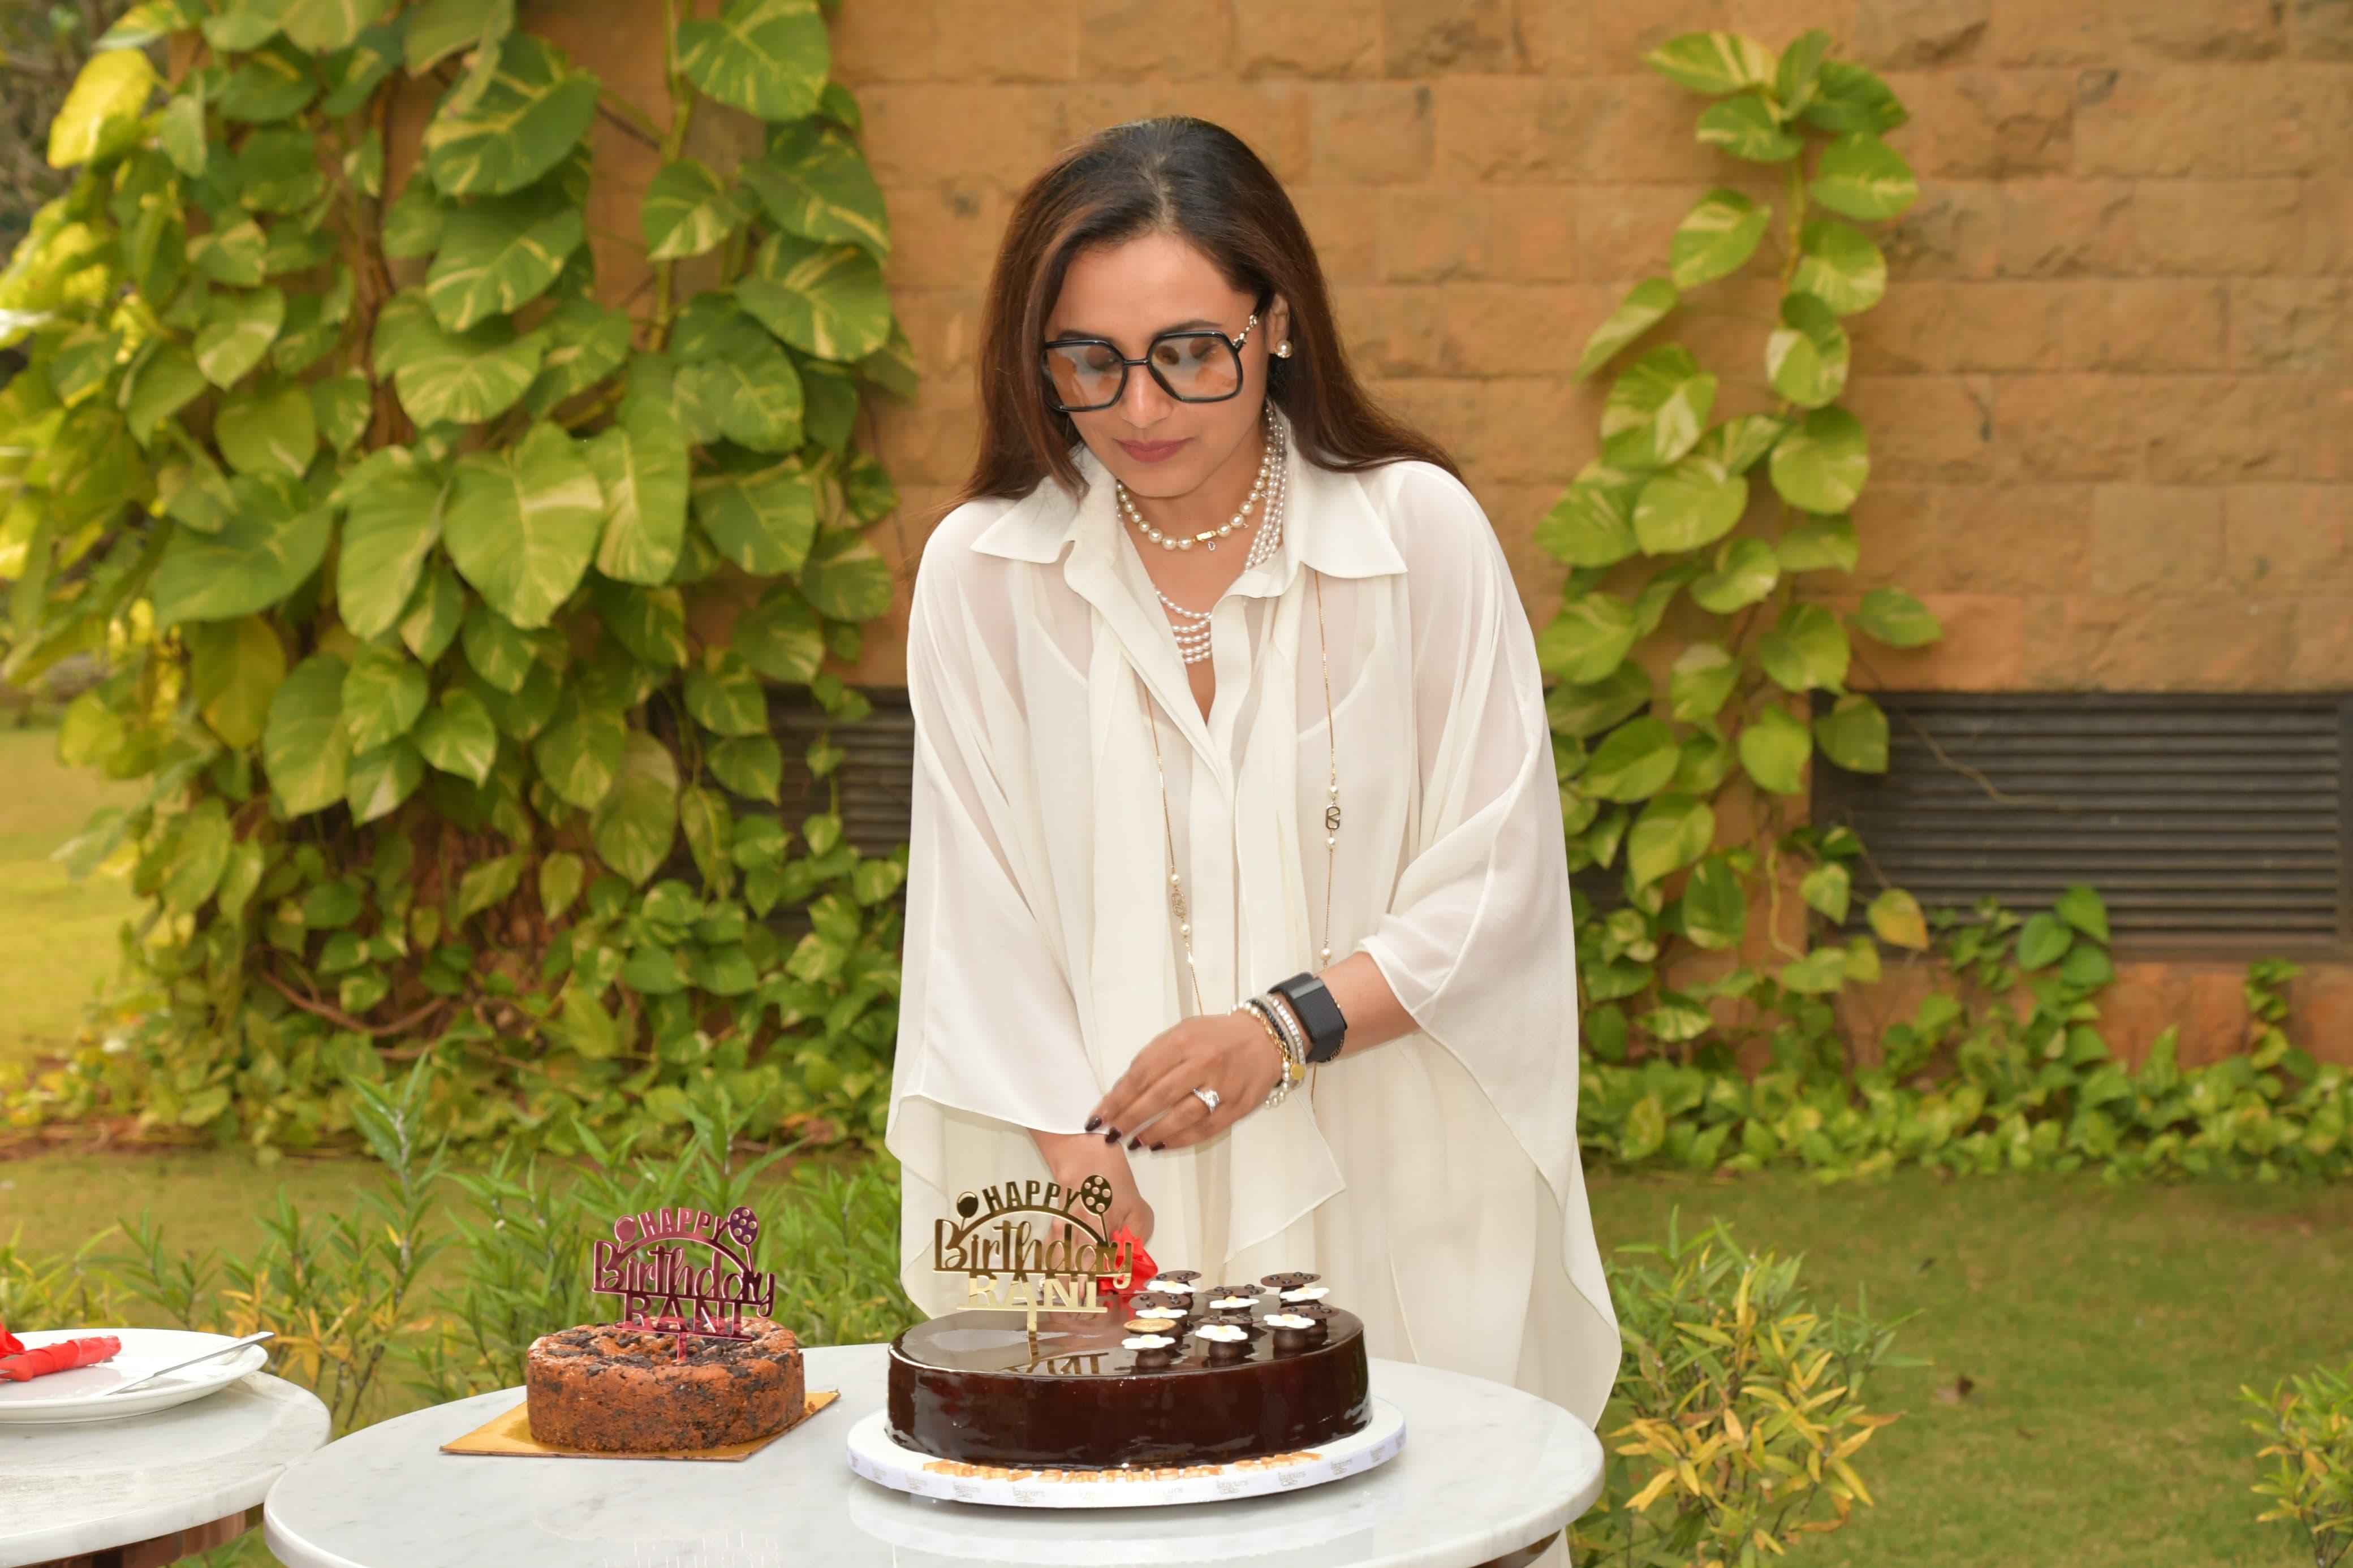 Rani Mukerji marked her birthday by spending time with the media. The actress is set to celebrate her 46th birthday on March 21st